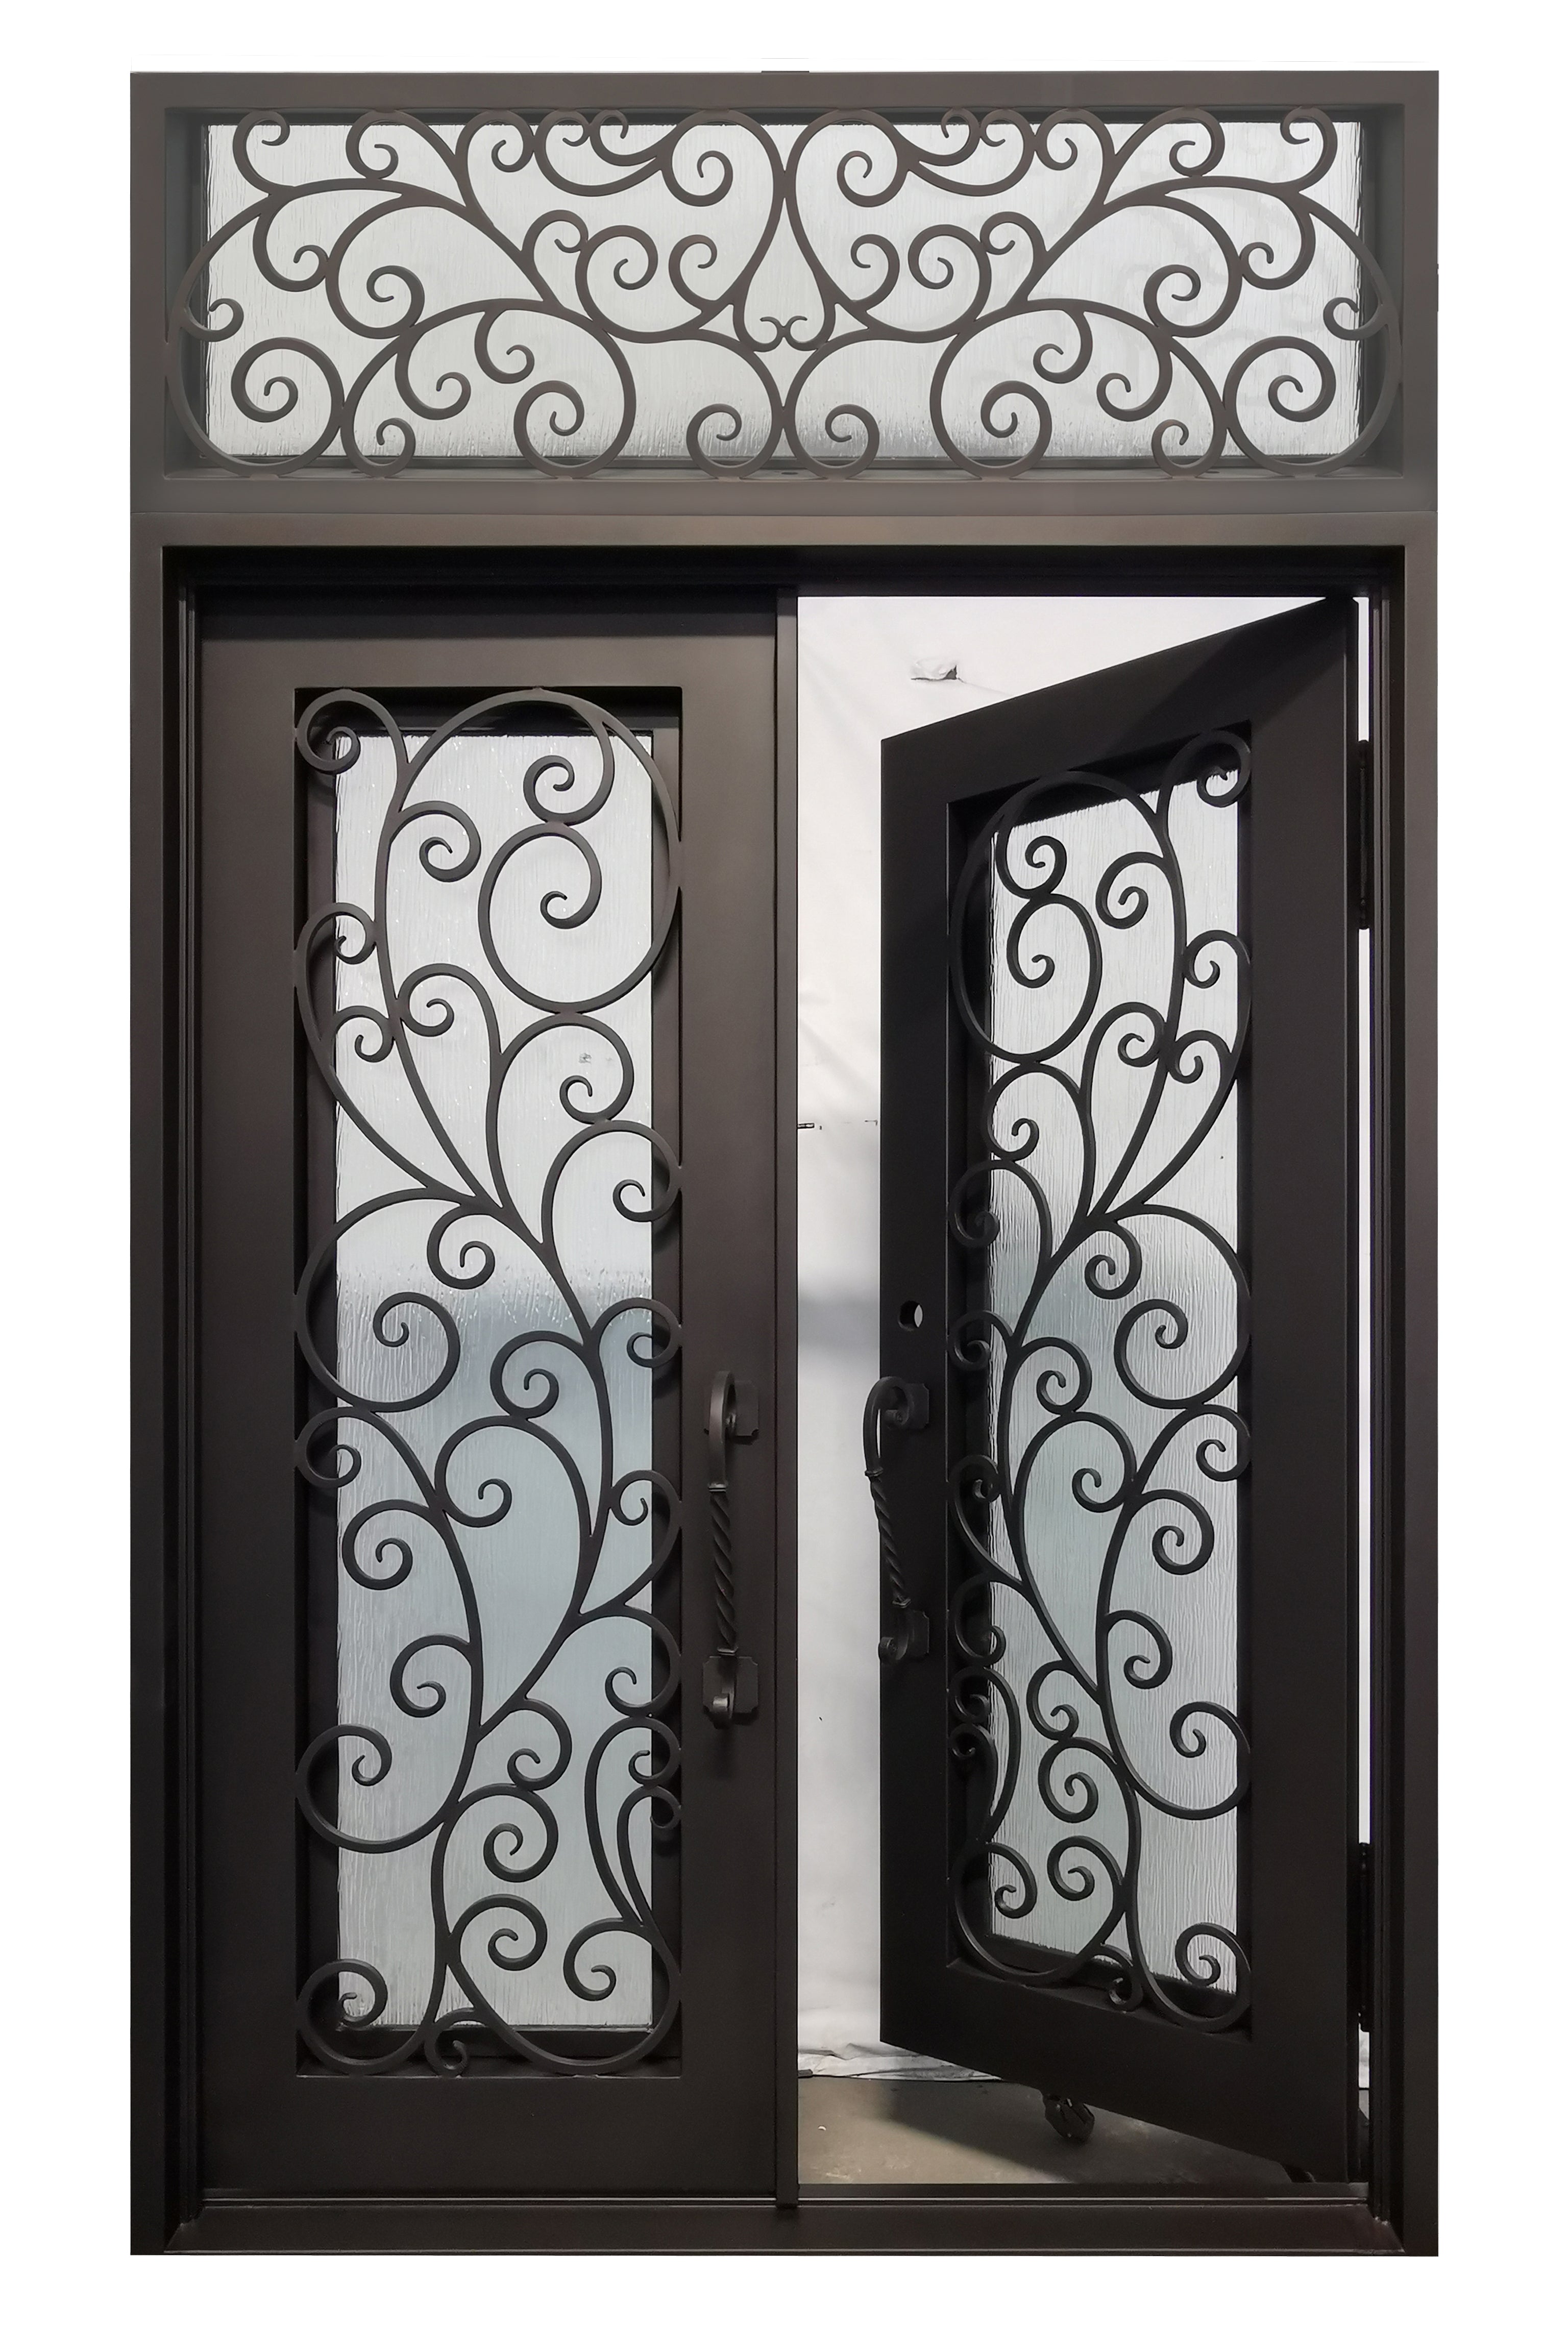 Benbrook Model Front Entry Door With Transom 72 By 120  Dark Bronze Finish - AAWAIZ IMPORTS